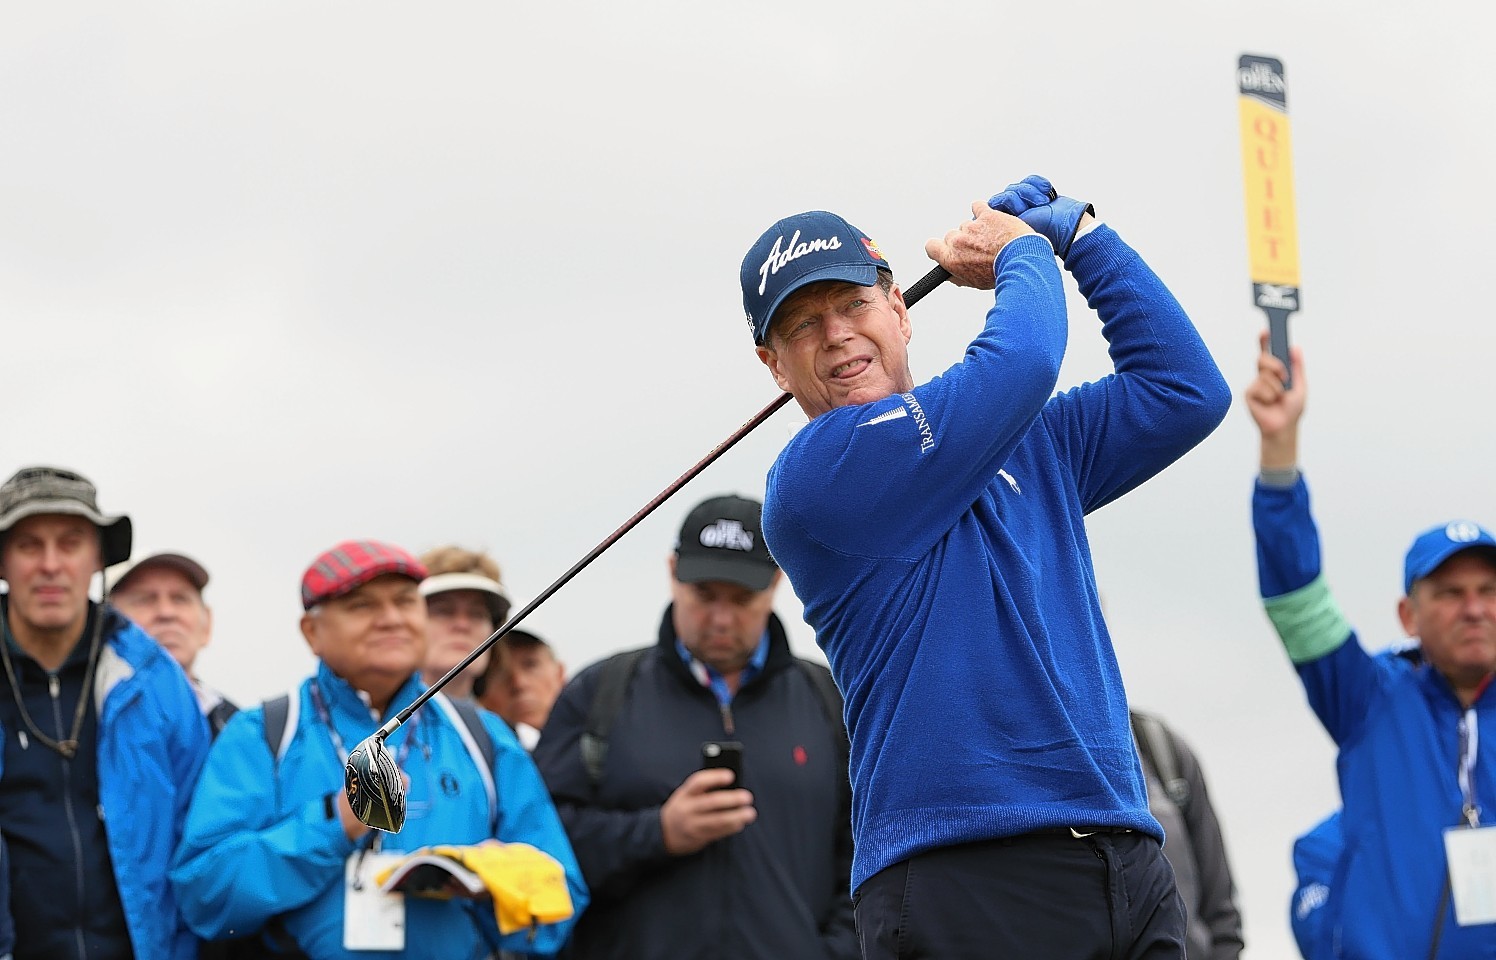 Tom Watson of the United States tees off during a practice round ahead of the 144th Open Championship at The Old Course